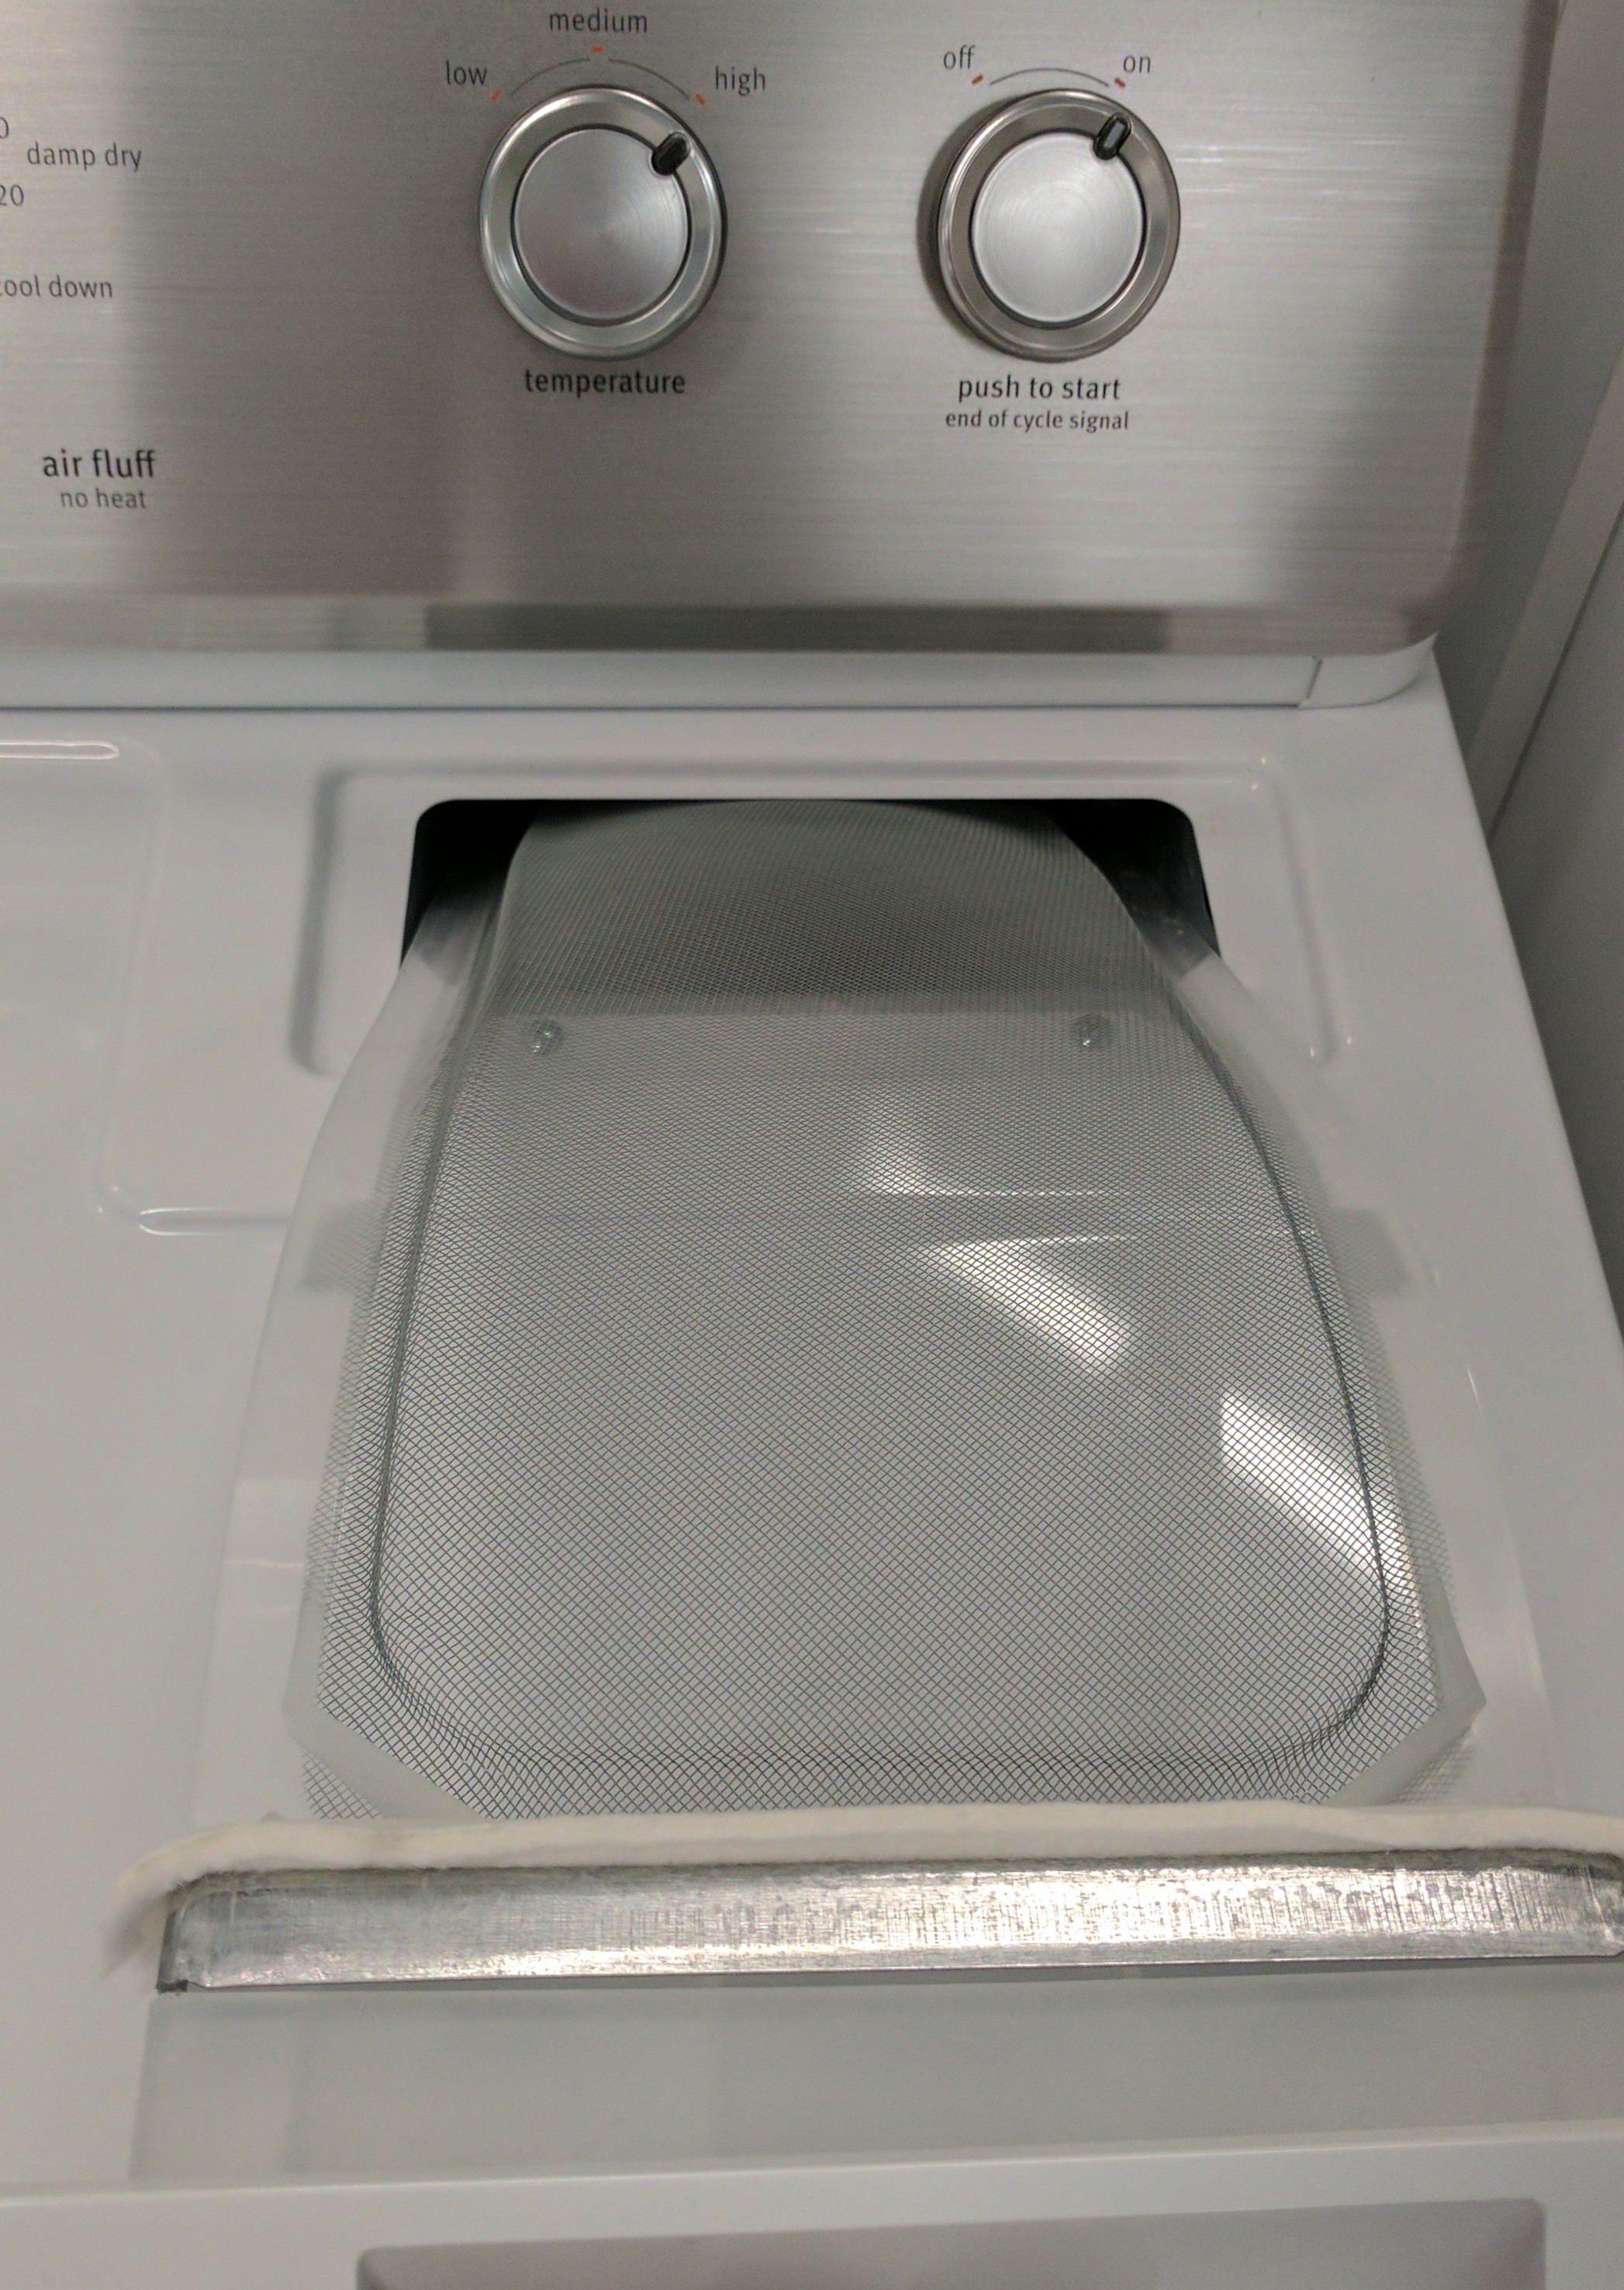 How to Clean a Dryer Lint Trap